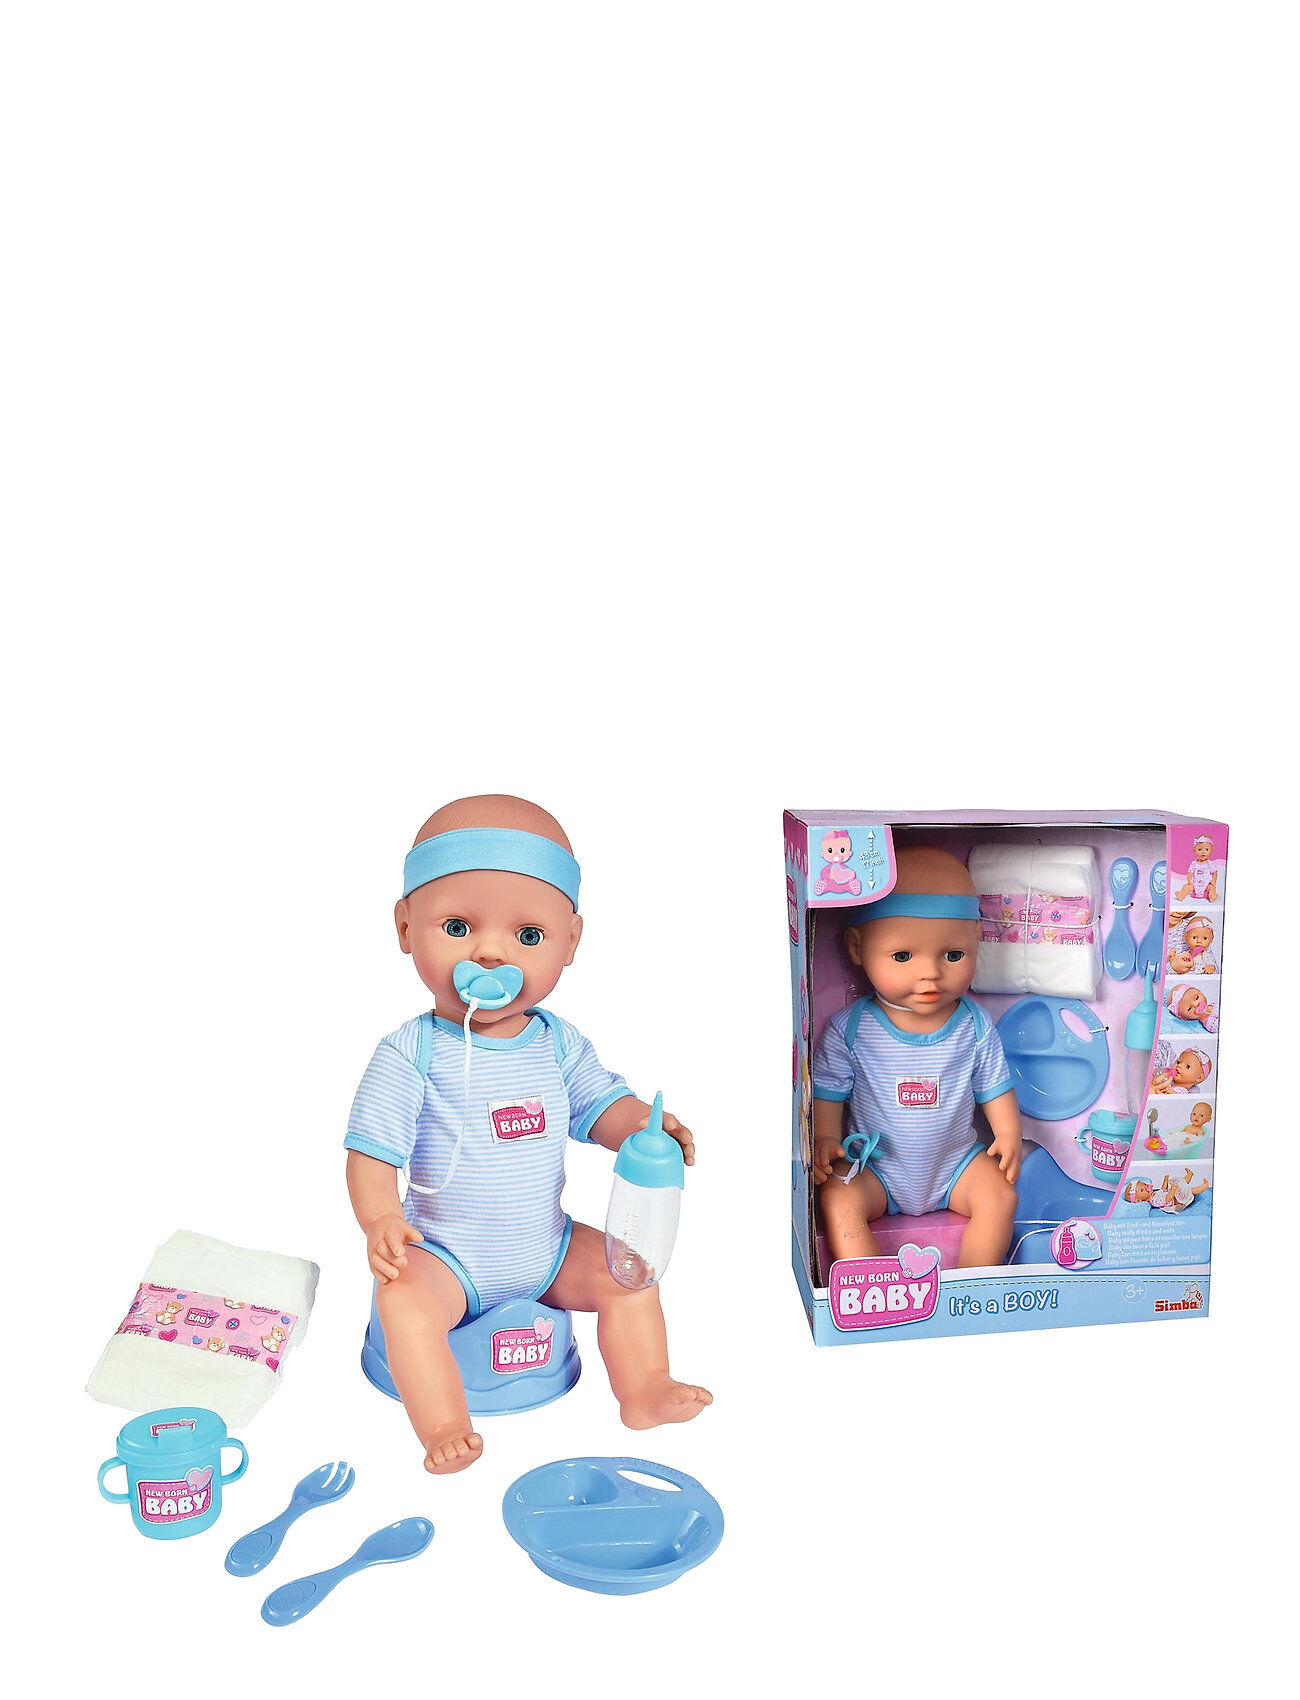 Simba Toys Nbb Baby Blue Accessories Toys Dolls & Accessories Dolls Blå Simba Toys